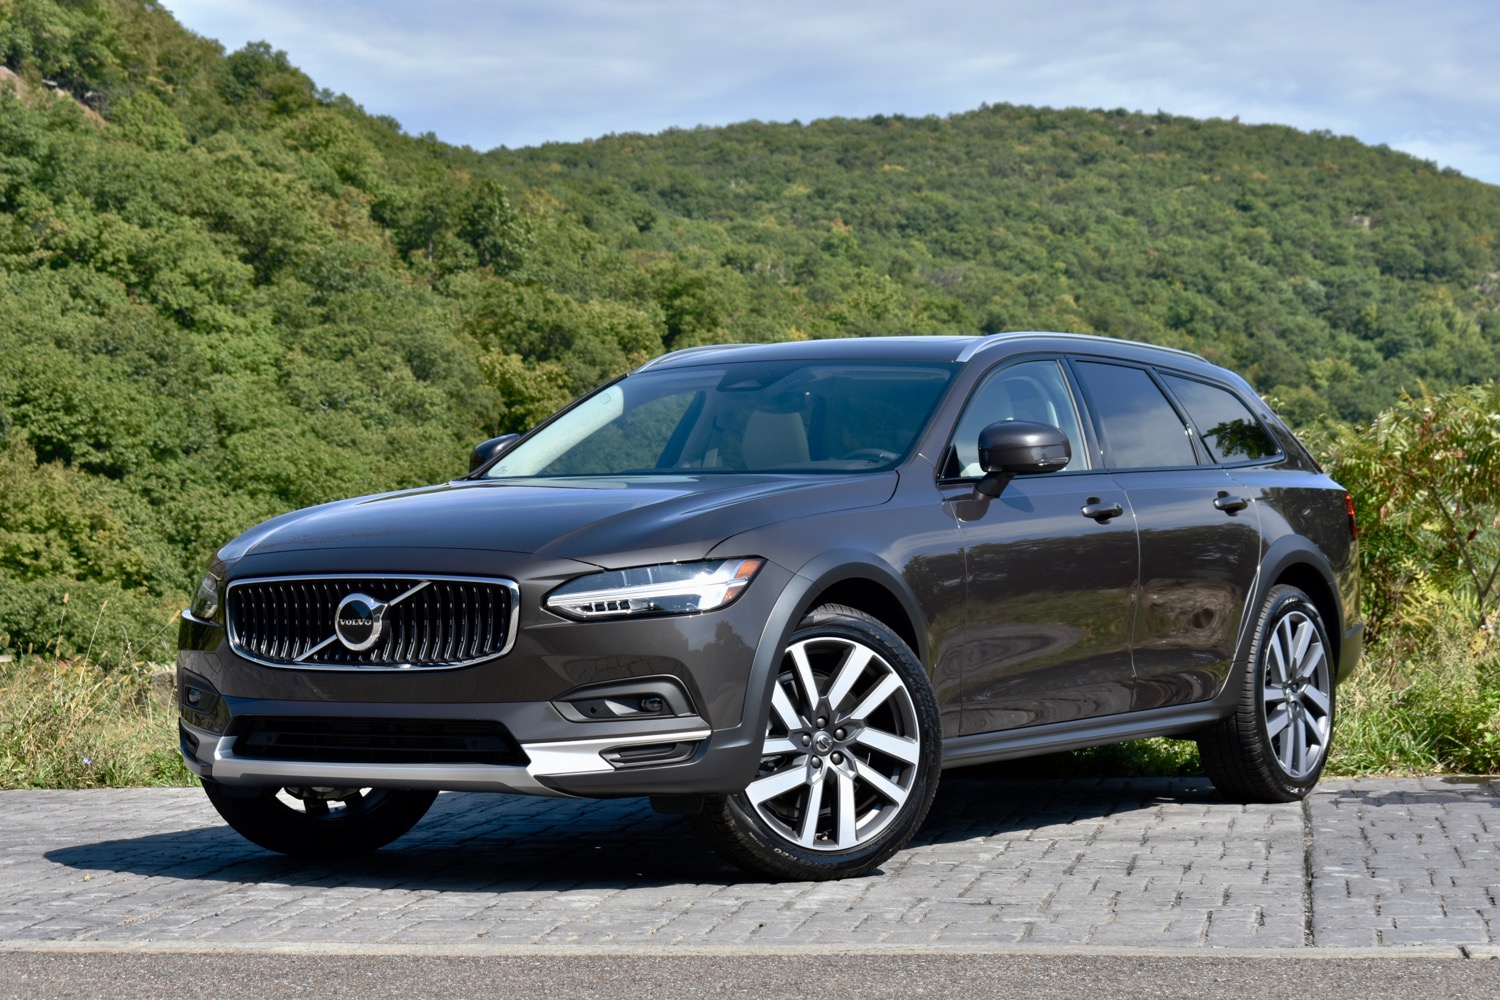 https://www.digitaltrends.com/wp-content/uploads/2021/10/2022-volvo-v90-cross-country-front-three-quarter-view.jpg?fit=1500%2C1000&p=1